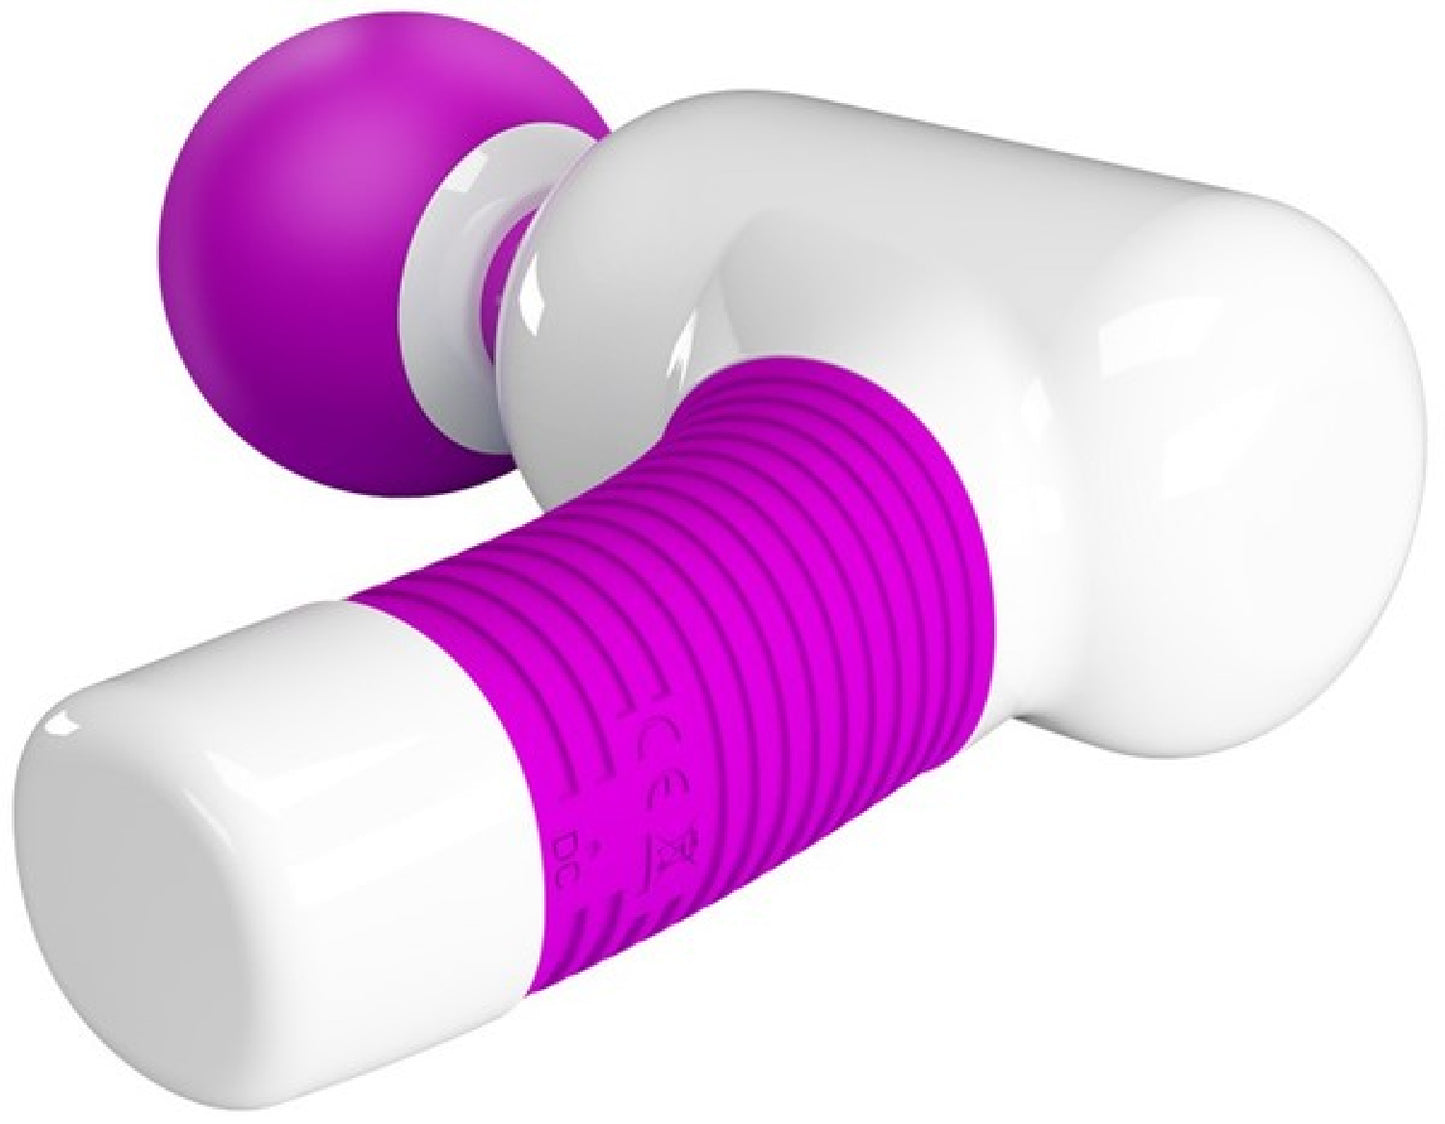 Massager Wand (Purple & White) - One Stop Adult Shop